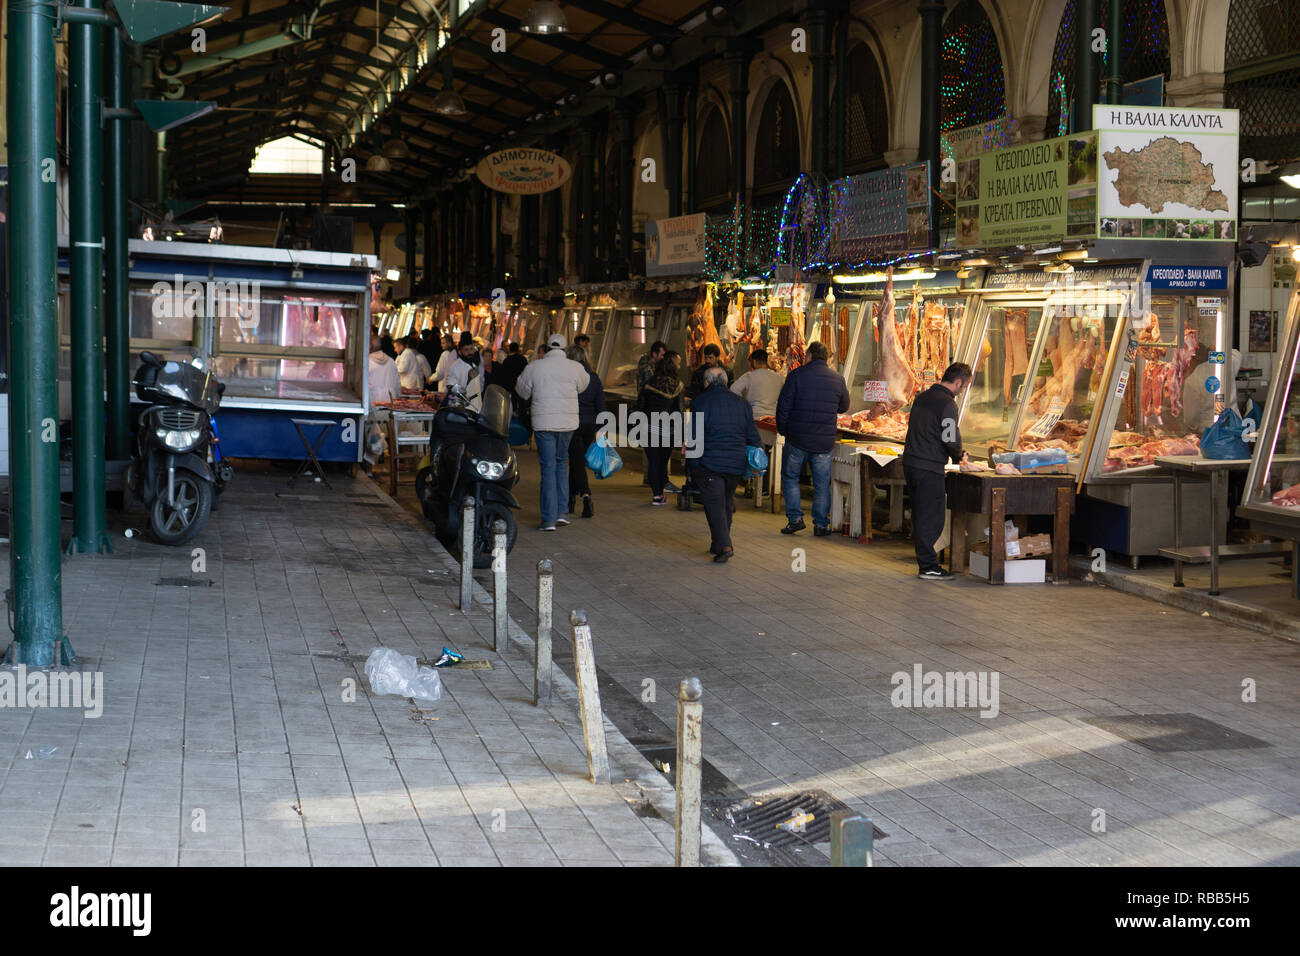 Central Market in Athens, a place where many Athenians buy their fresh produce, is a great place to visit to experience everyday life of Athenians. Stock Photo